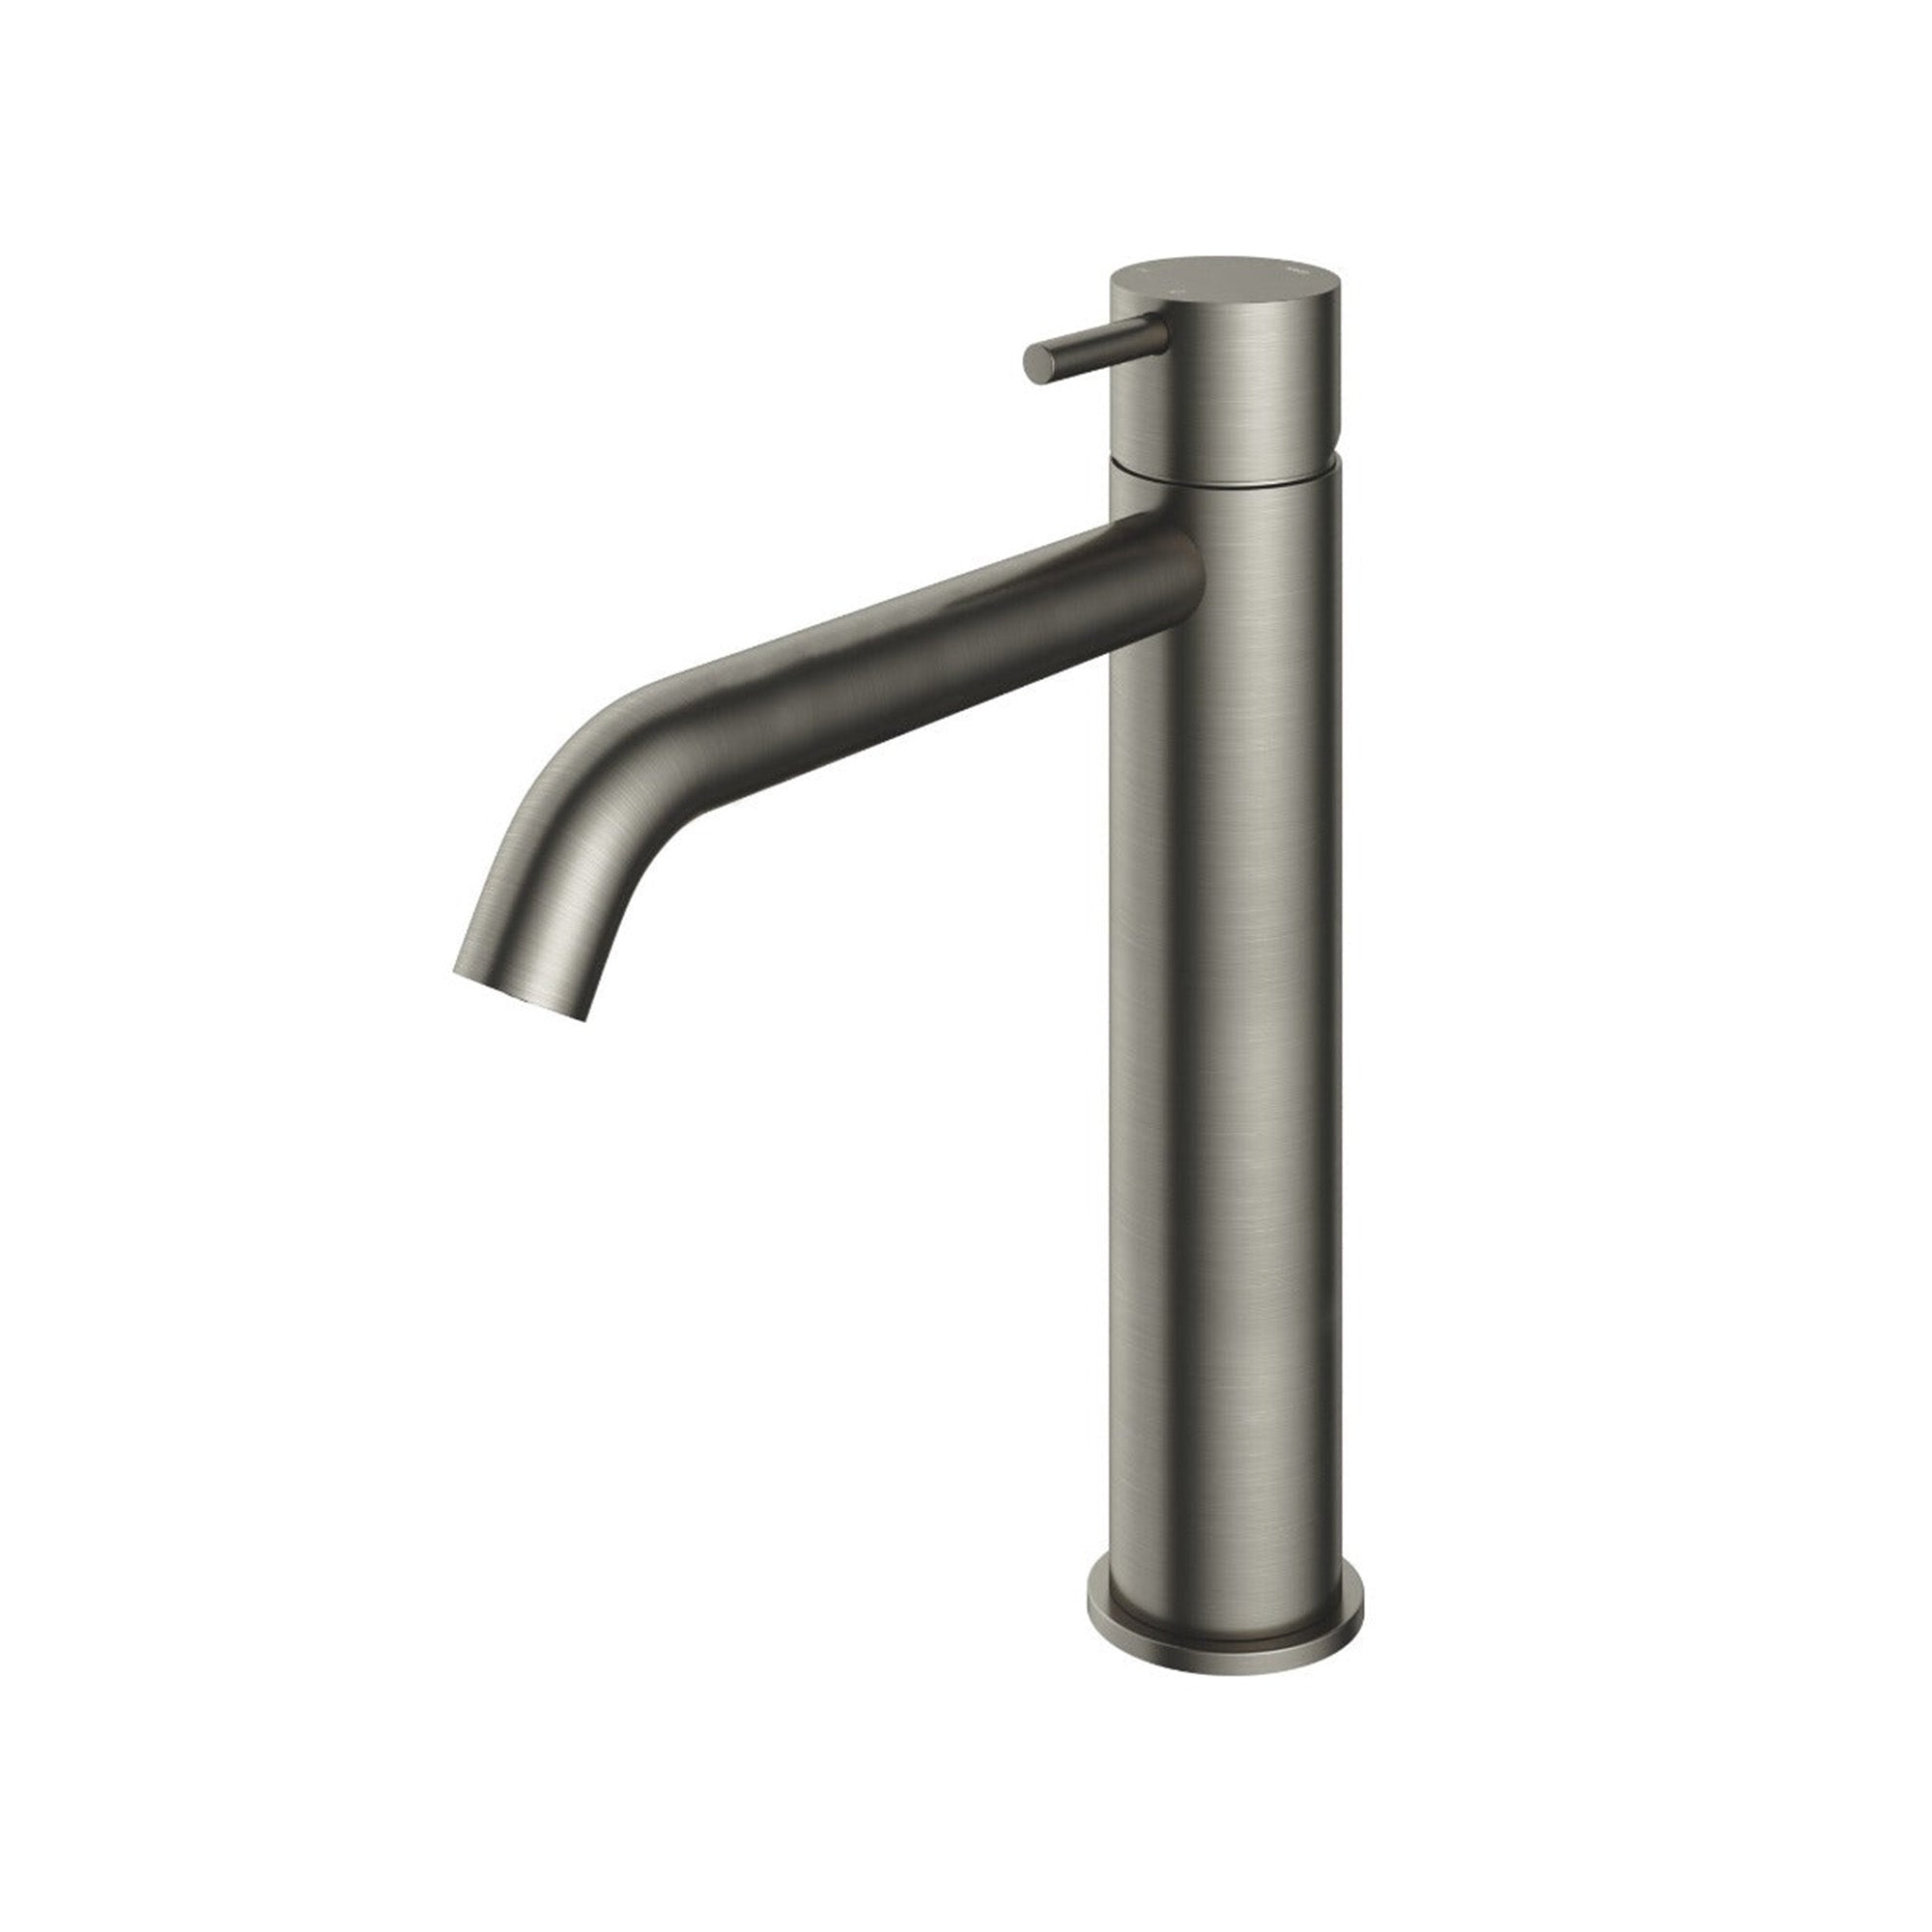 cobber 286mm tall basin-mixer tap monobloc curved spout brushed nickel